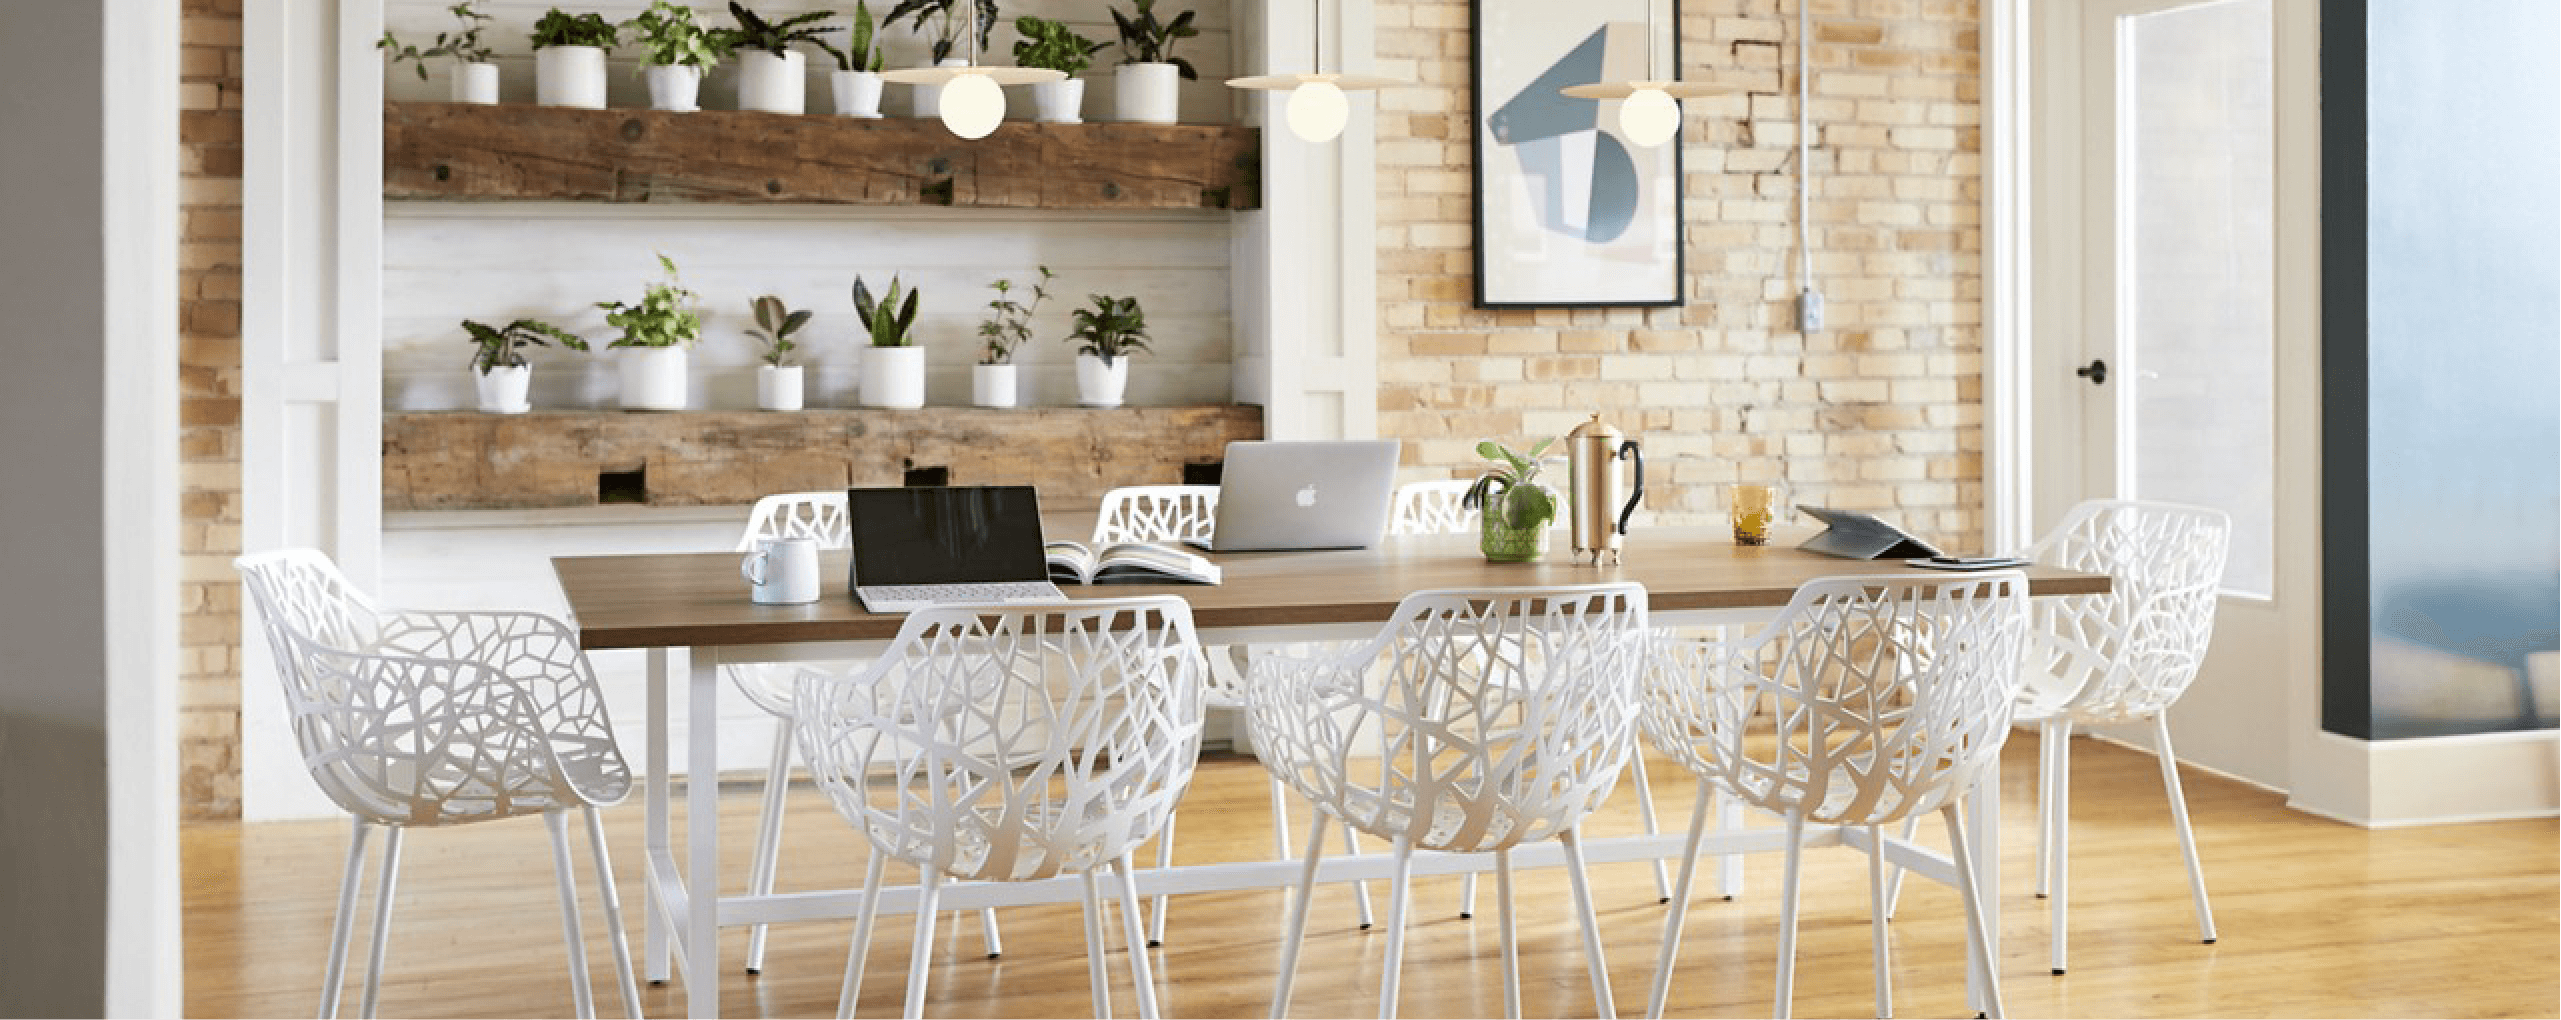 bright conference table with plants and brick wall